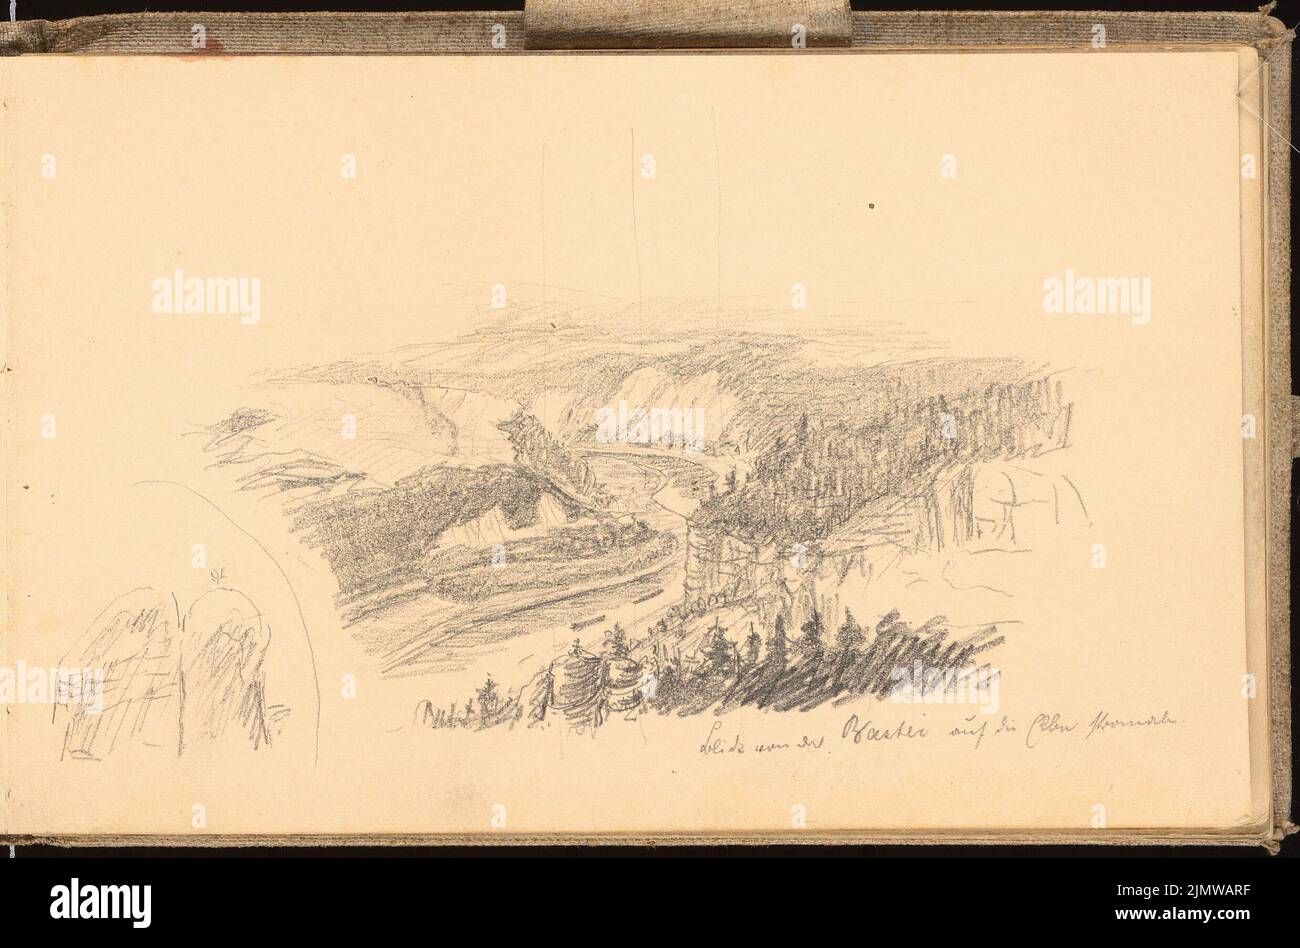 Michel Paul sen. (1877-1938), sketchbook. 1898-99 (1898): View from the Bastei to the Elbe, perspective view. Pencil on paper, 13.8 x 20.9 cm (including scan edges) Michel Paul sen.  (1877-1938): Skizzenbuch. 1898-99 Stock Photo